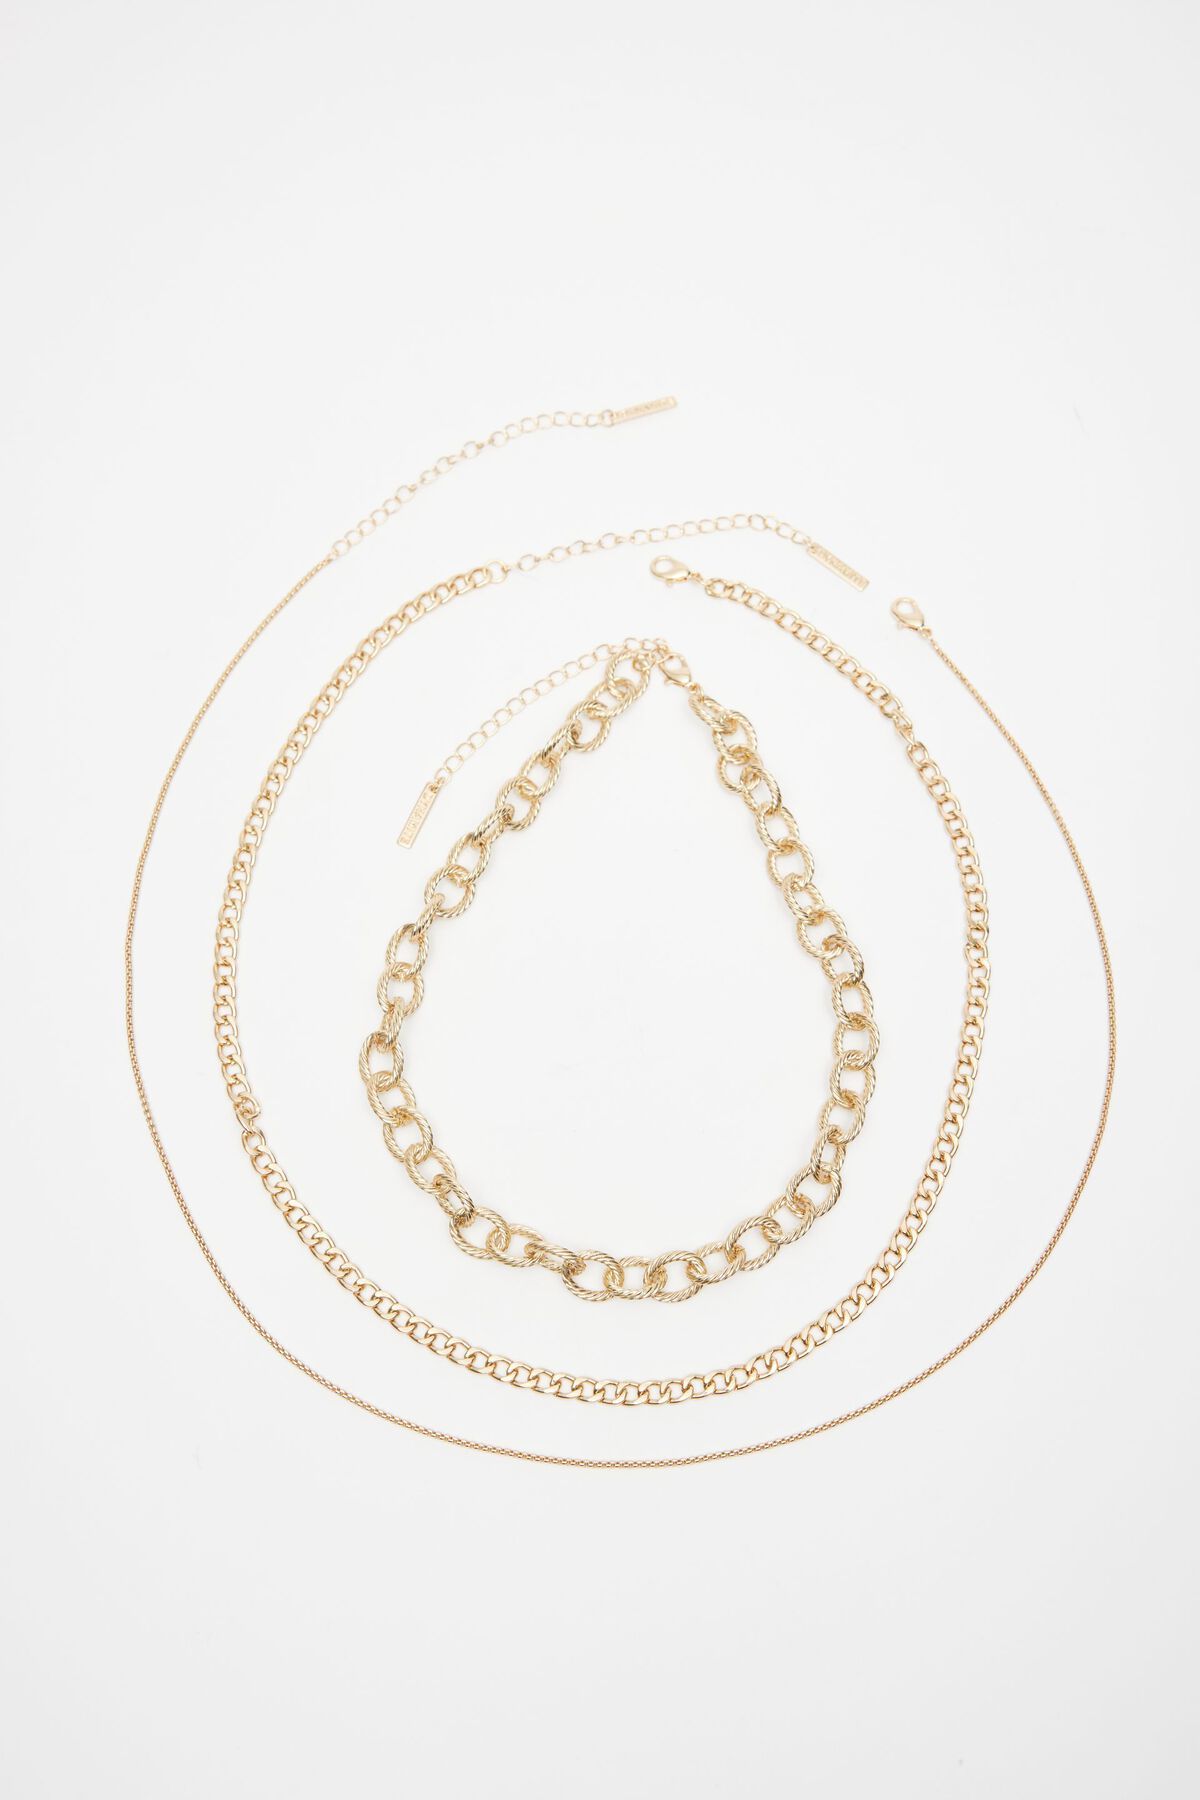 Dynamite Layered Textured & Oval Link Necklace. 2